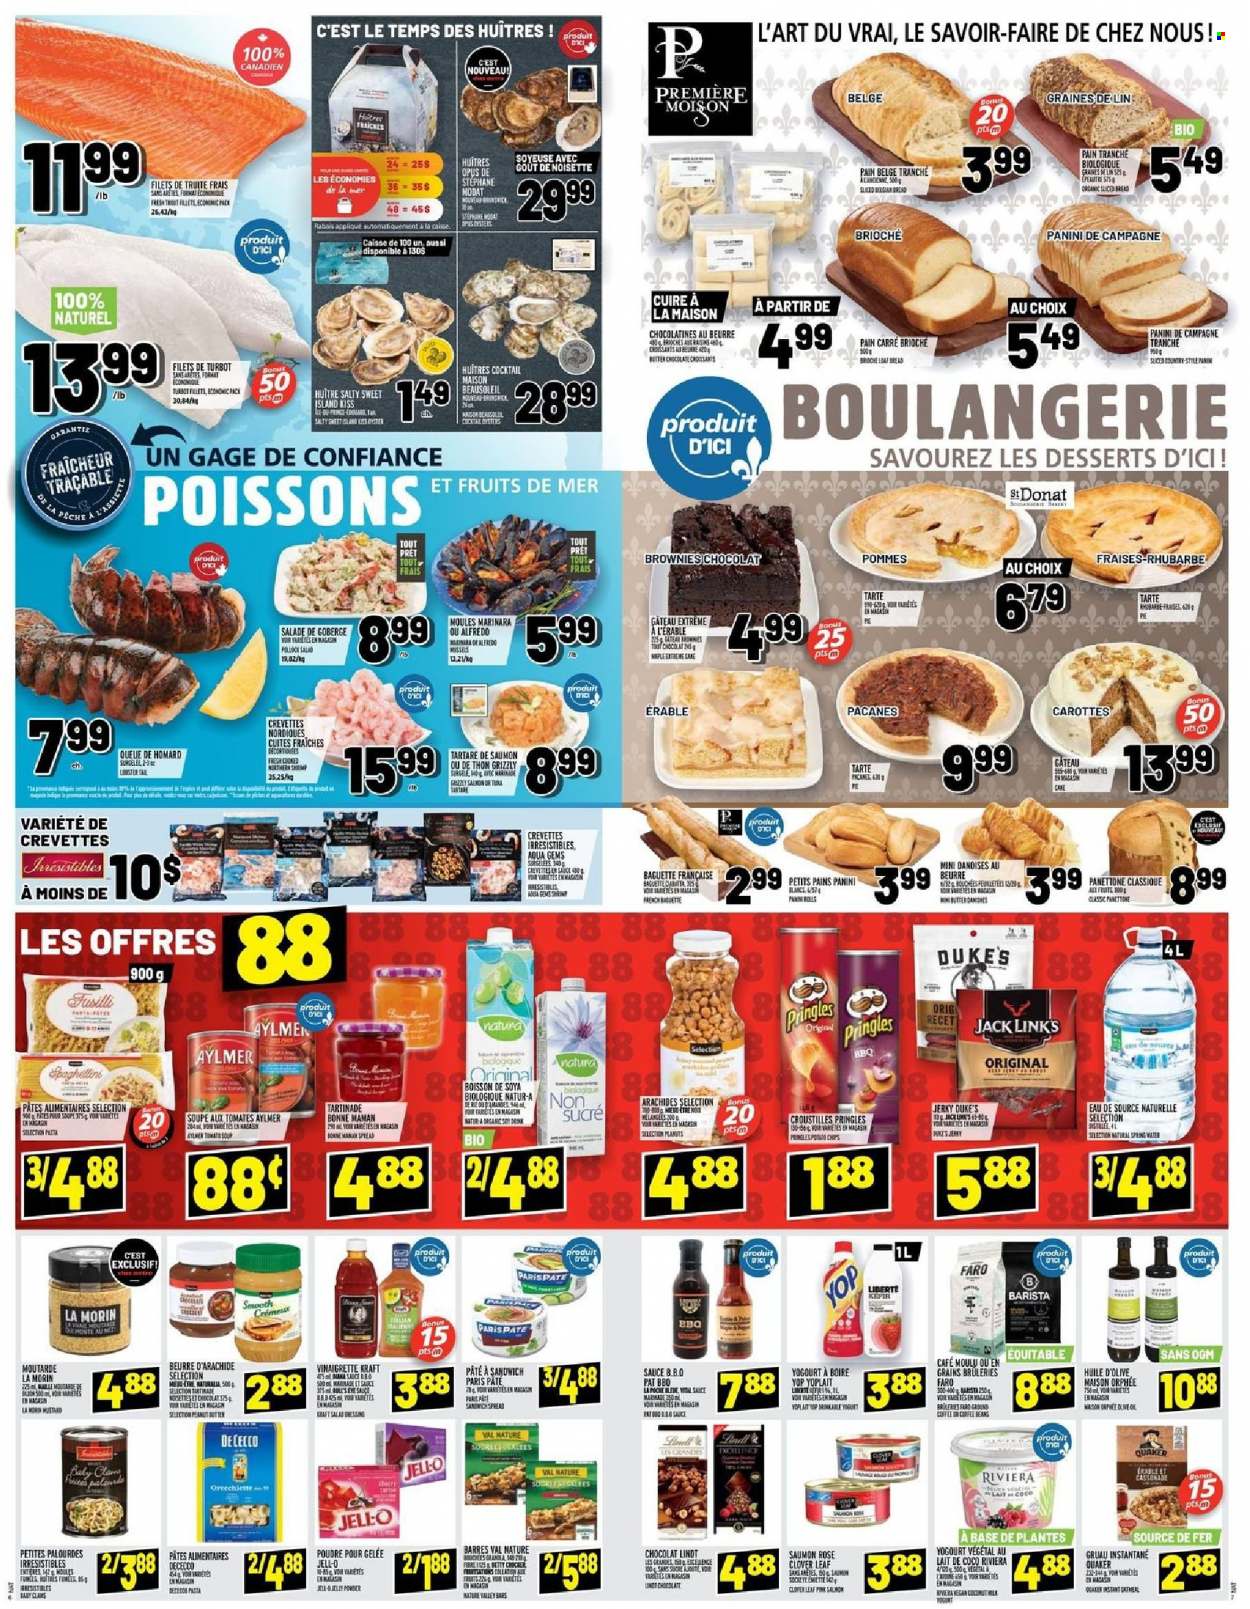 thumbnail - Metro Flyer - September 30, 2021 - October 06, 2021 - Sales products - bread, cake, pie, croissant, panini, brioche, panettone, brownies, clams, salmon, trout, oysters, turbot, shrimps, sandwich, pasta, sauce, Quaker, Kraft®, jerky, Clover, Yoplait, butter, chocolate, Pringles, Jell-O, mustard, salad dressing, vinaigrette dressing, dressing, marinade, oil, peanuts, coffee, rosé wine, PREMIERE, rose, baguette, Lindt. Page 5.